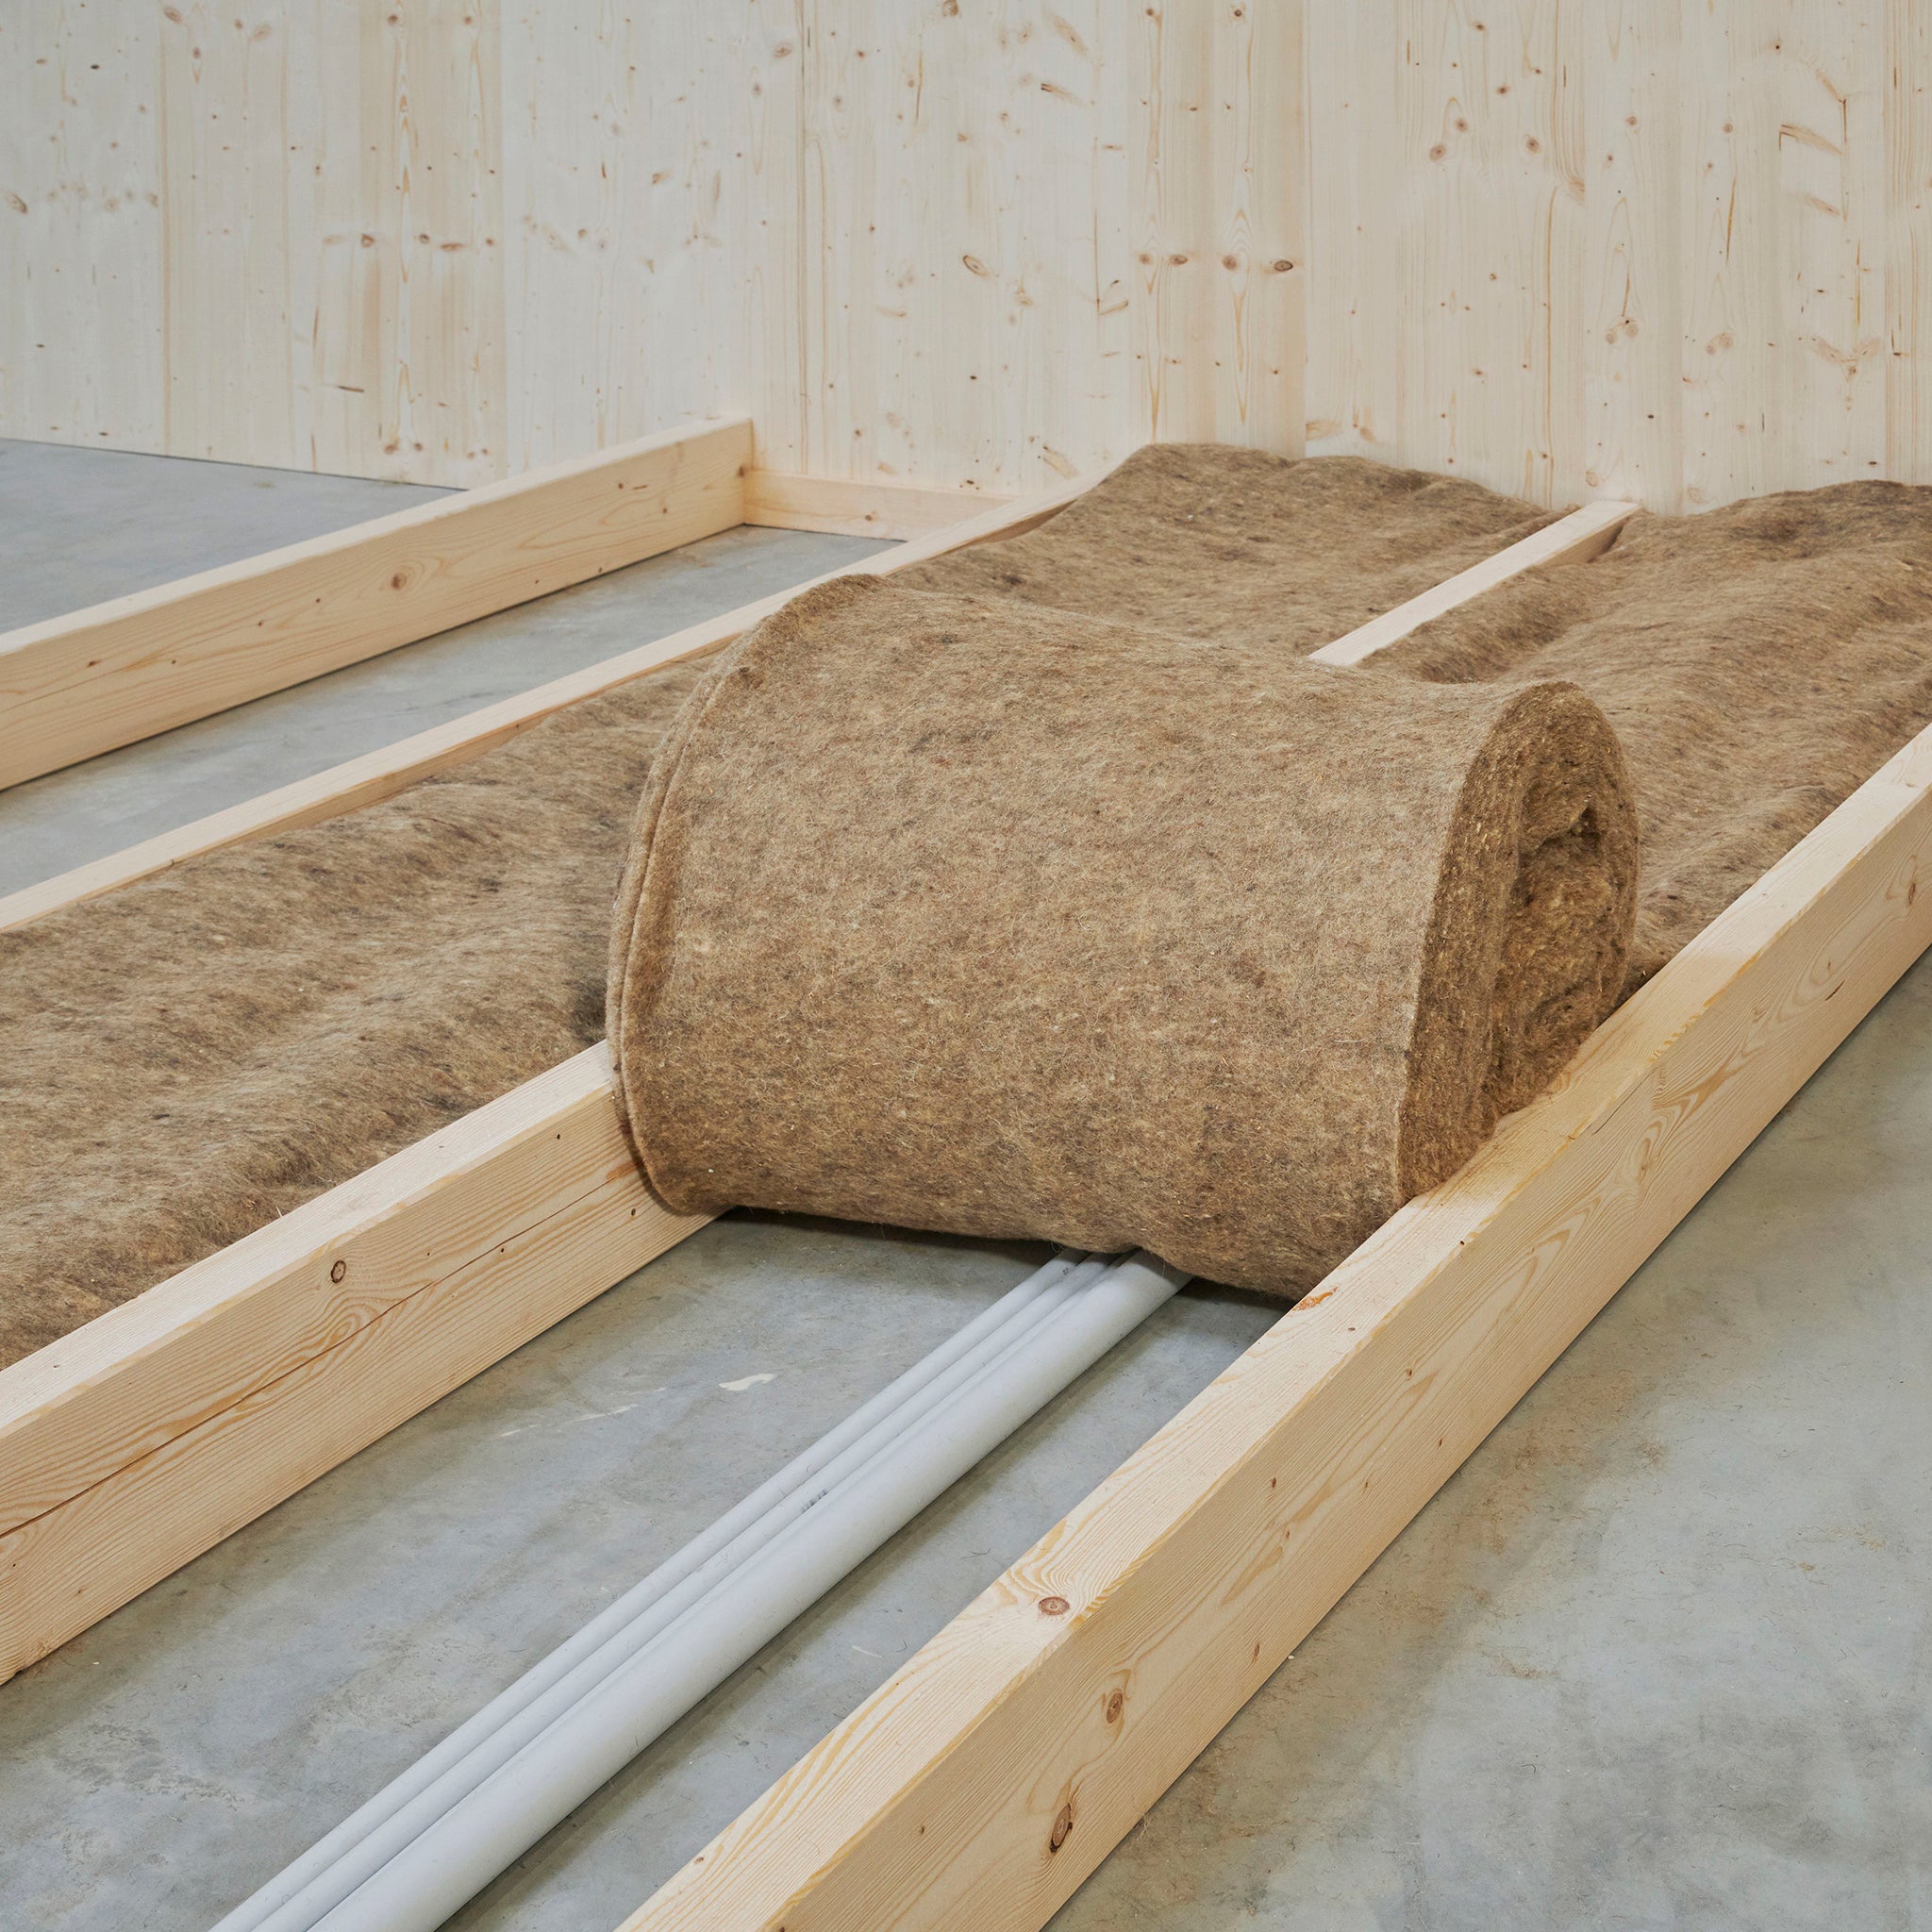 sheep wool insulation for the floor